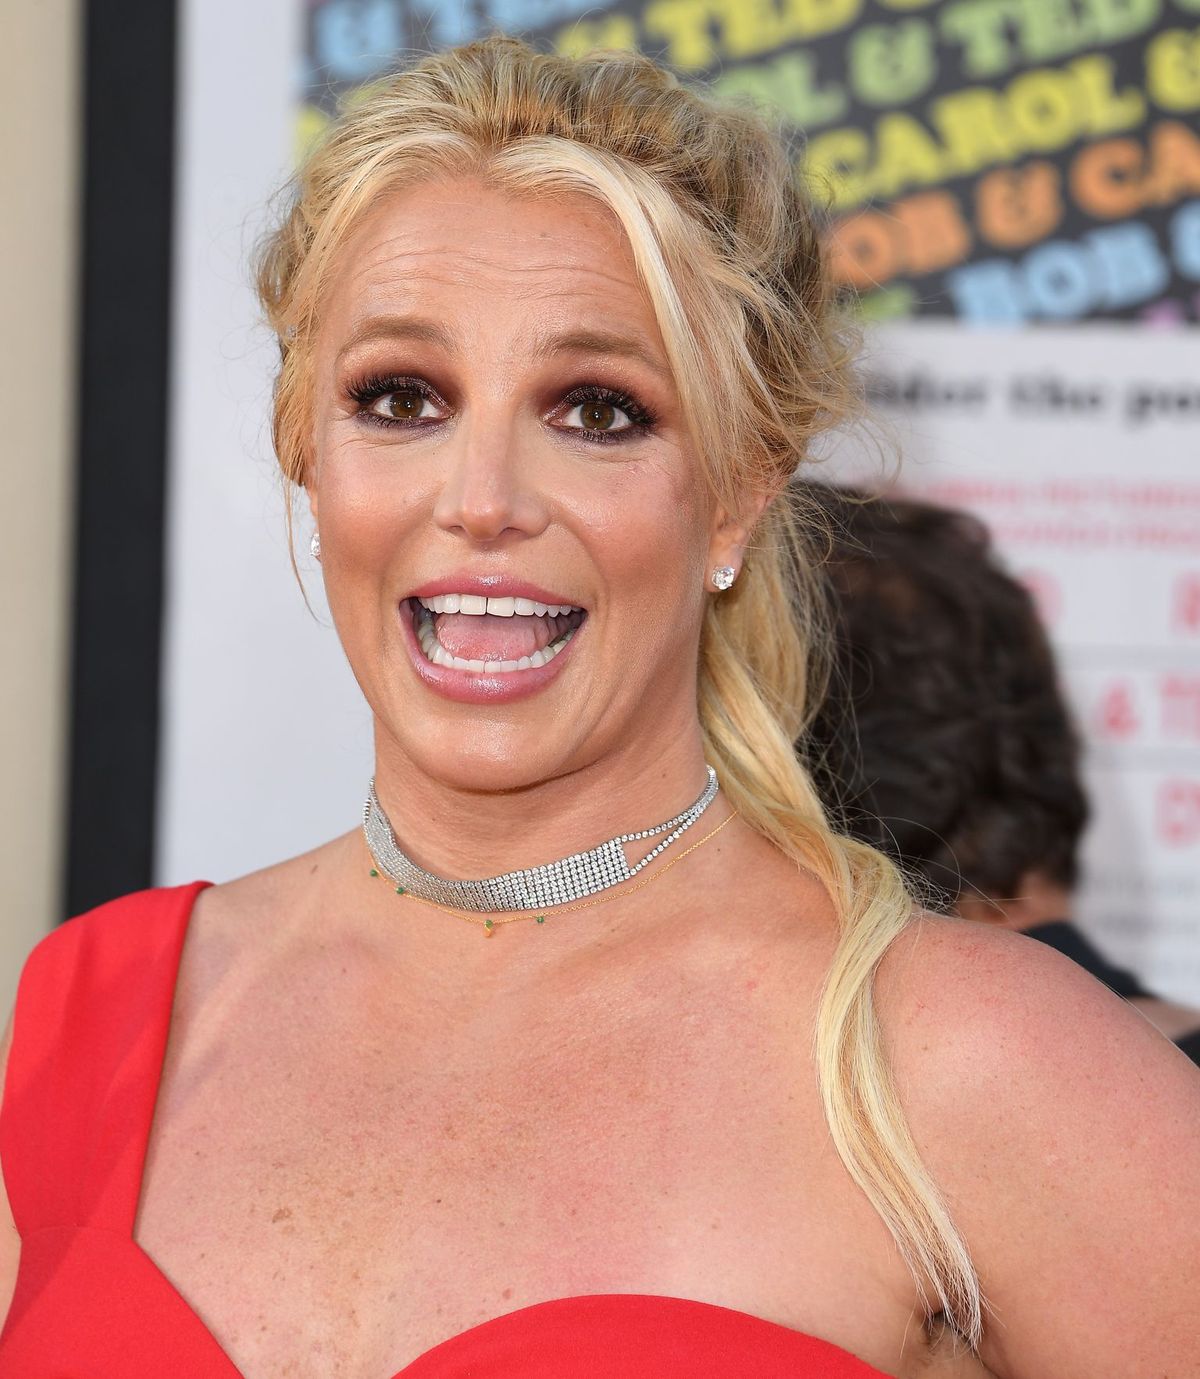 Britney Spears arrives at the Sony Pictures' "Once Upon A Time...In Hollywood" Los Angeles Premiere on July 22, 2019 | Photo: Getty Images